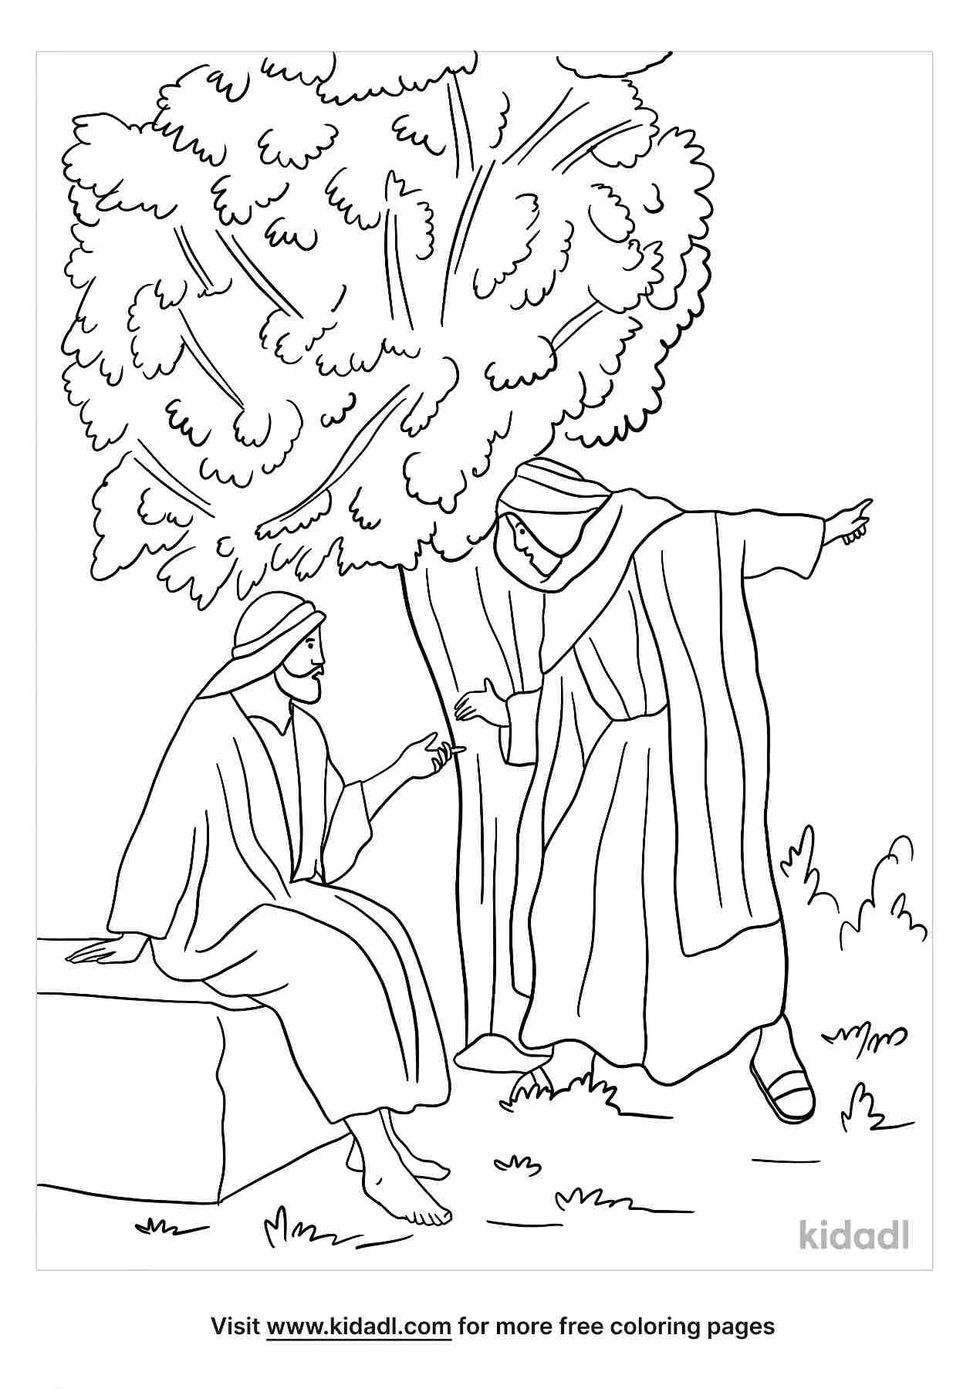 Nathaniel and the fig tree coloring pages for kids.